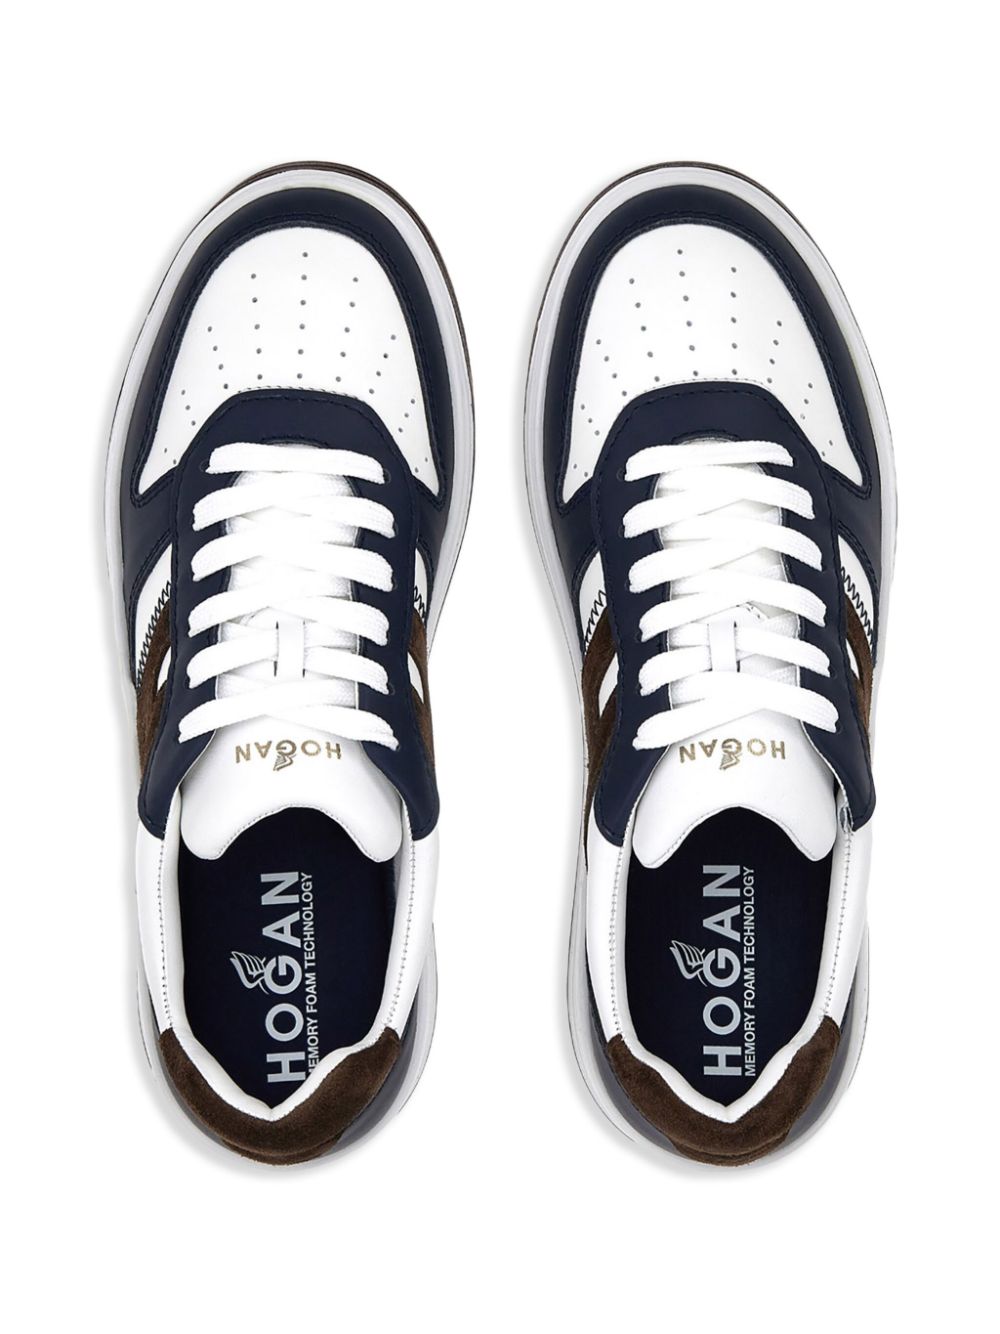 white and blue h630 sneaker